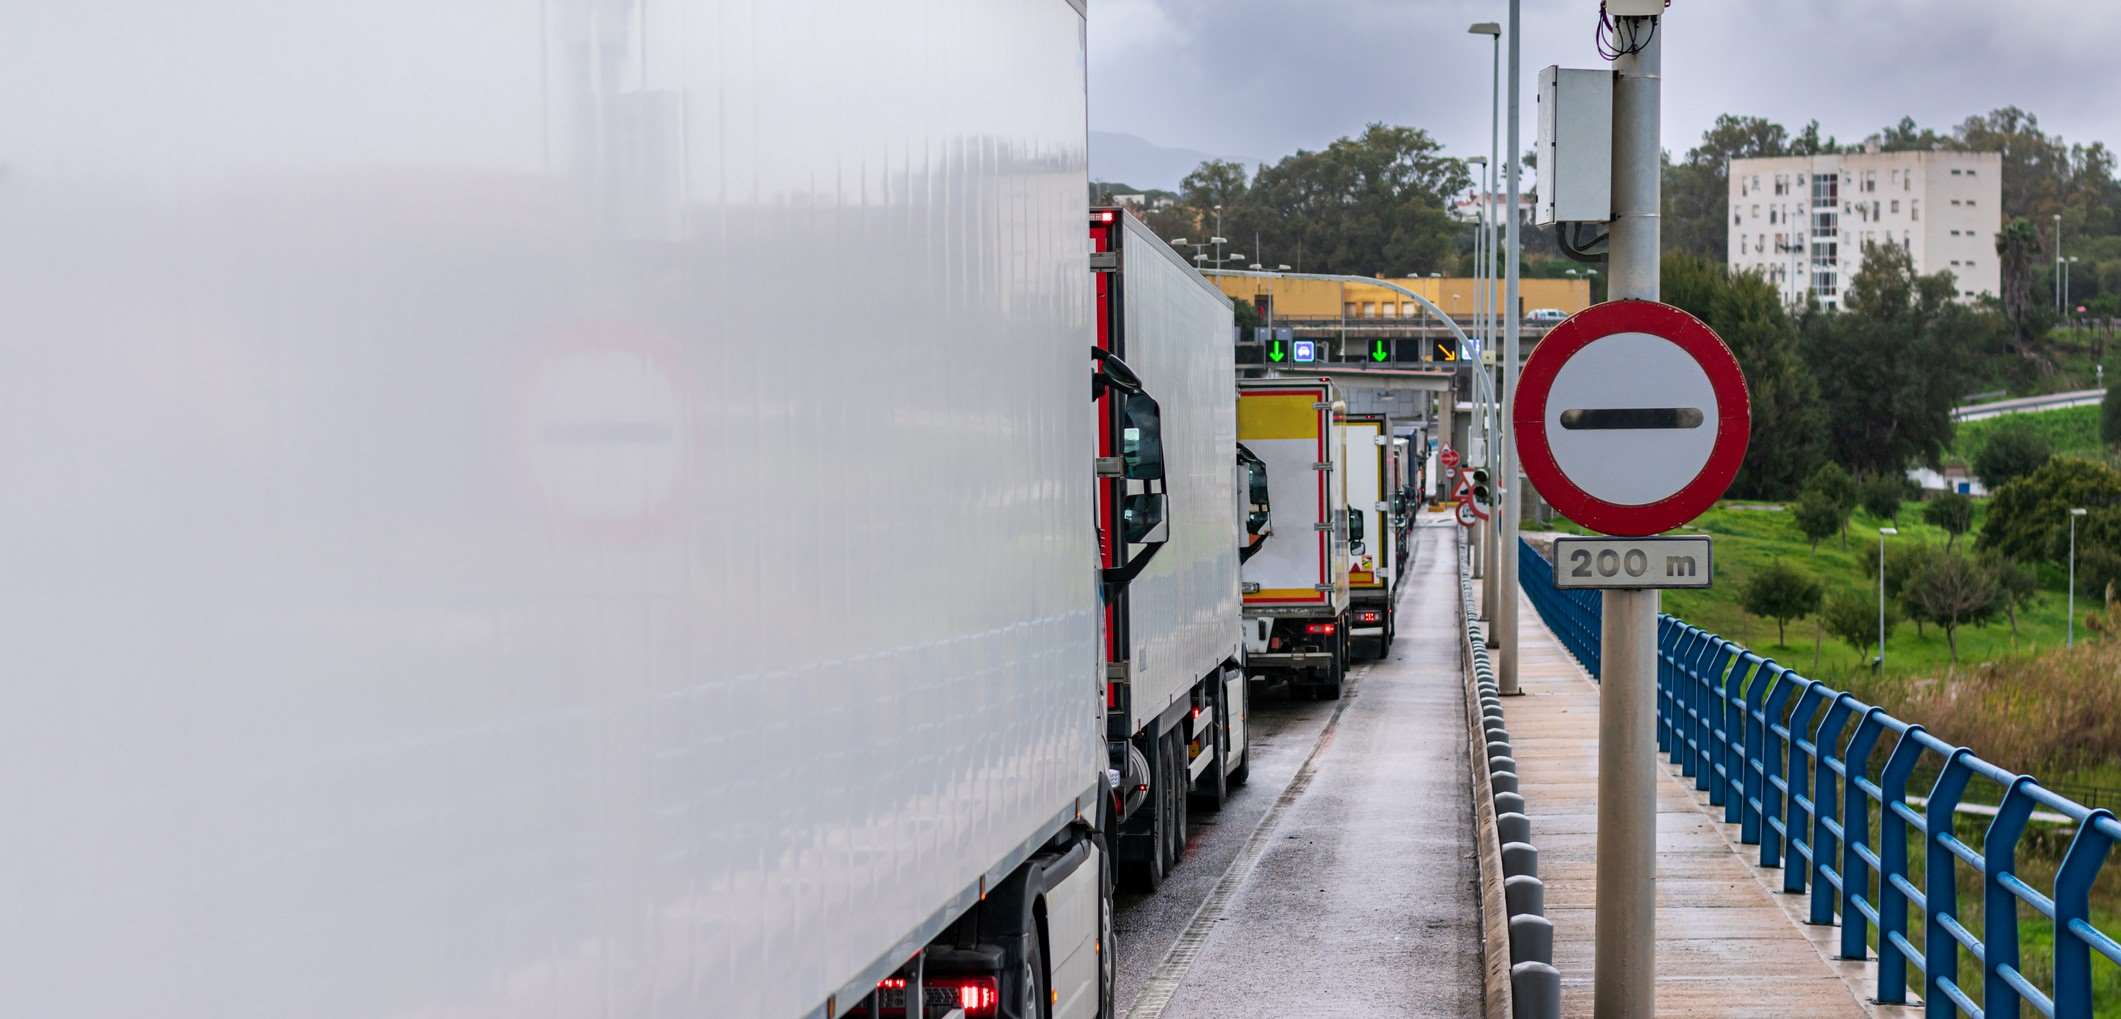 Lorries at border crossing waiting on customs clearance